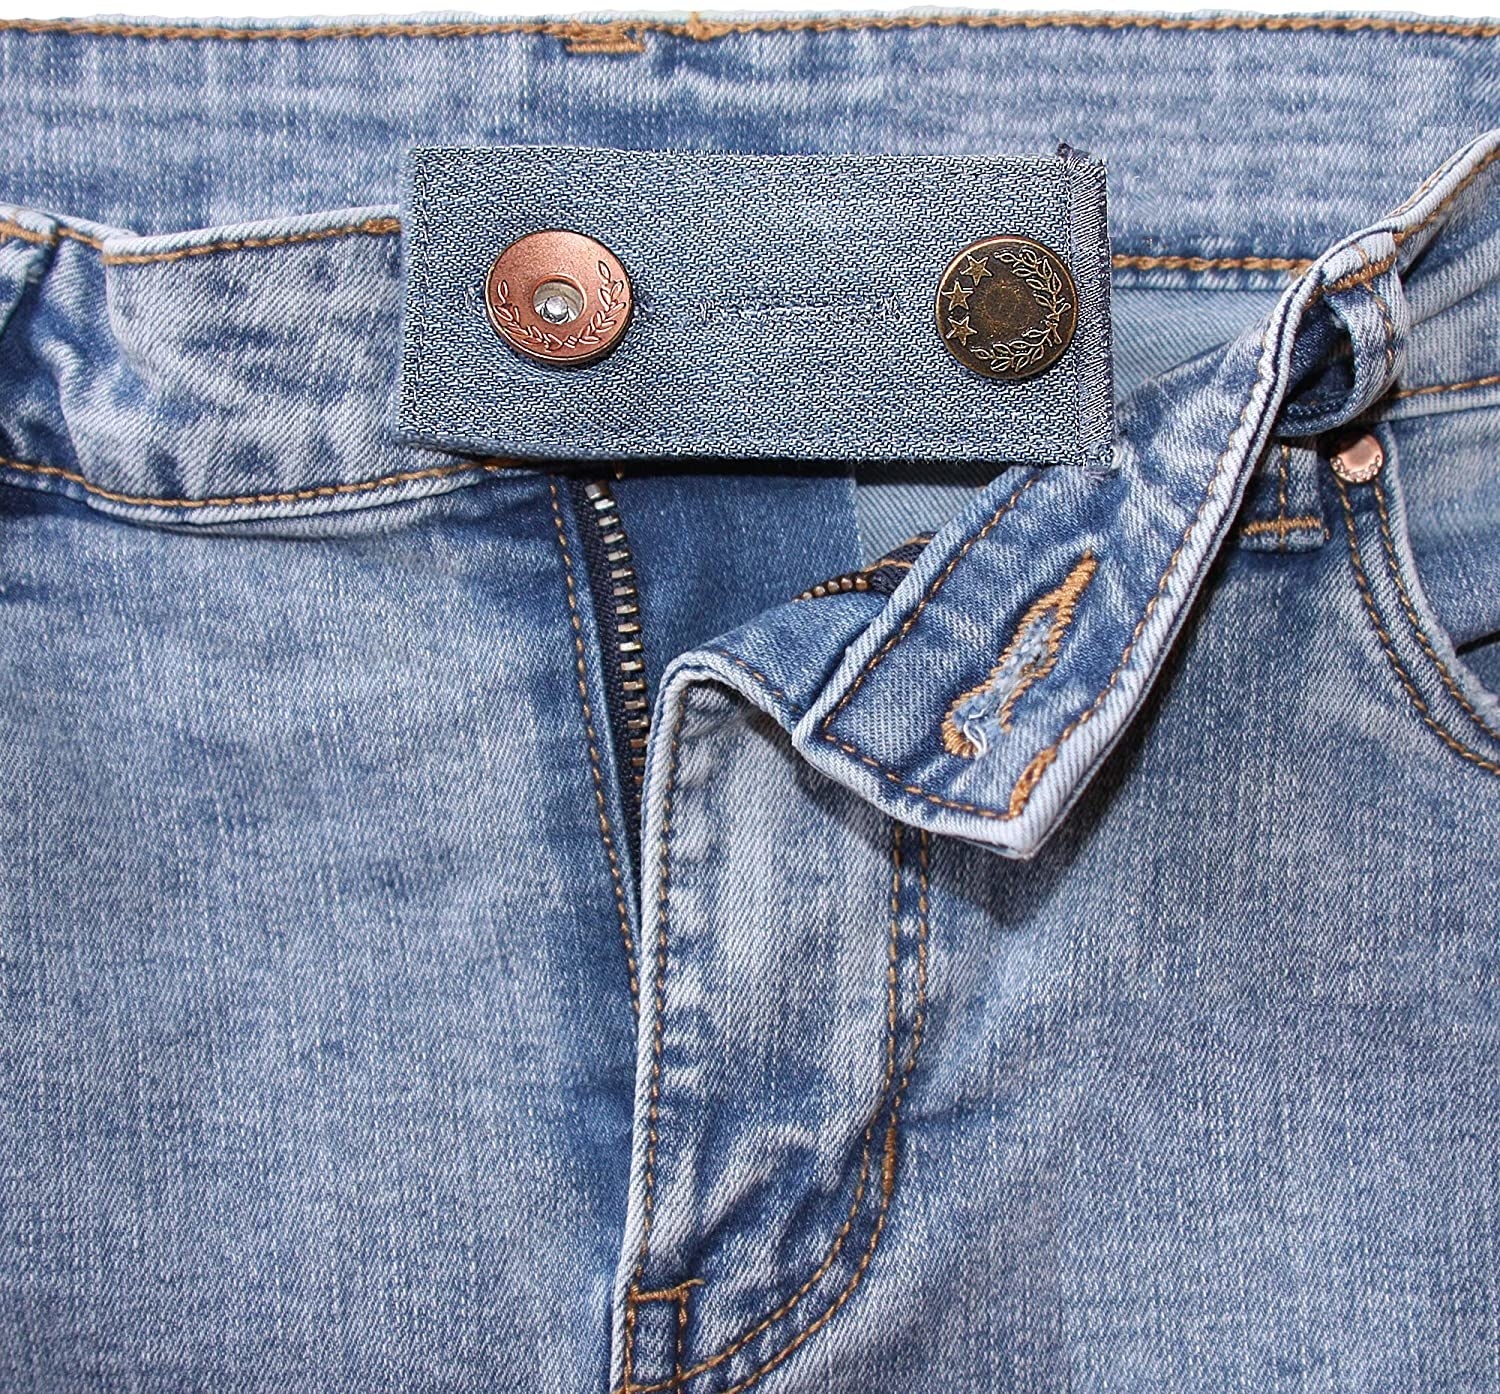 the button extender providing an extra inch of waistline to a pair of jeans